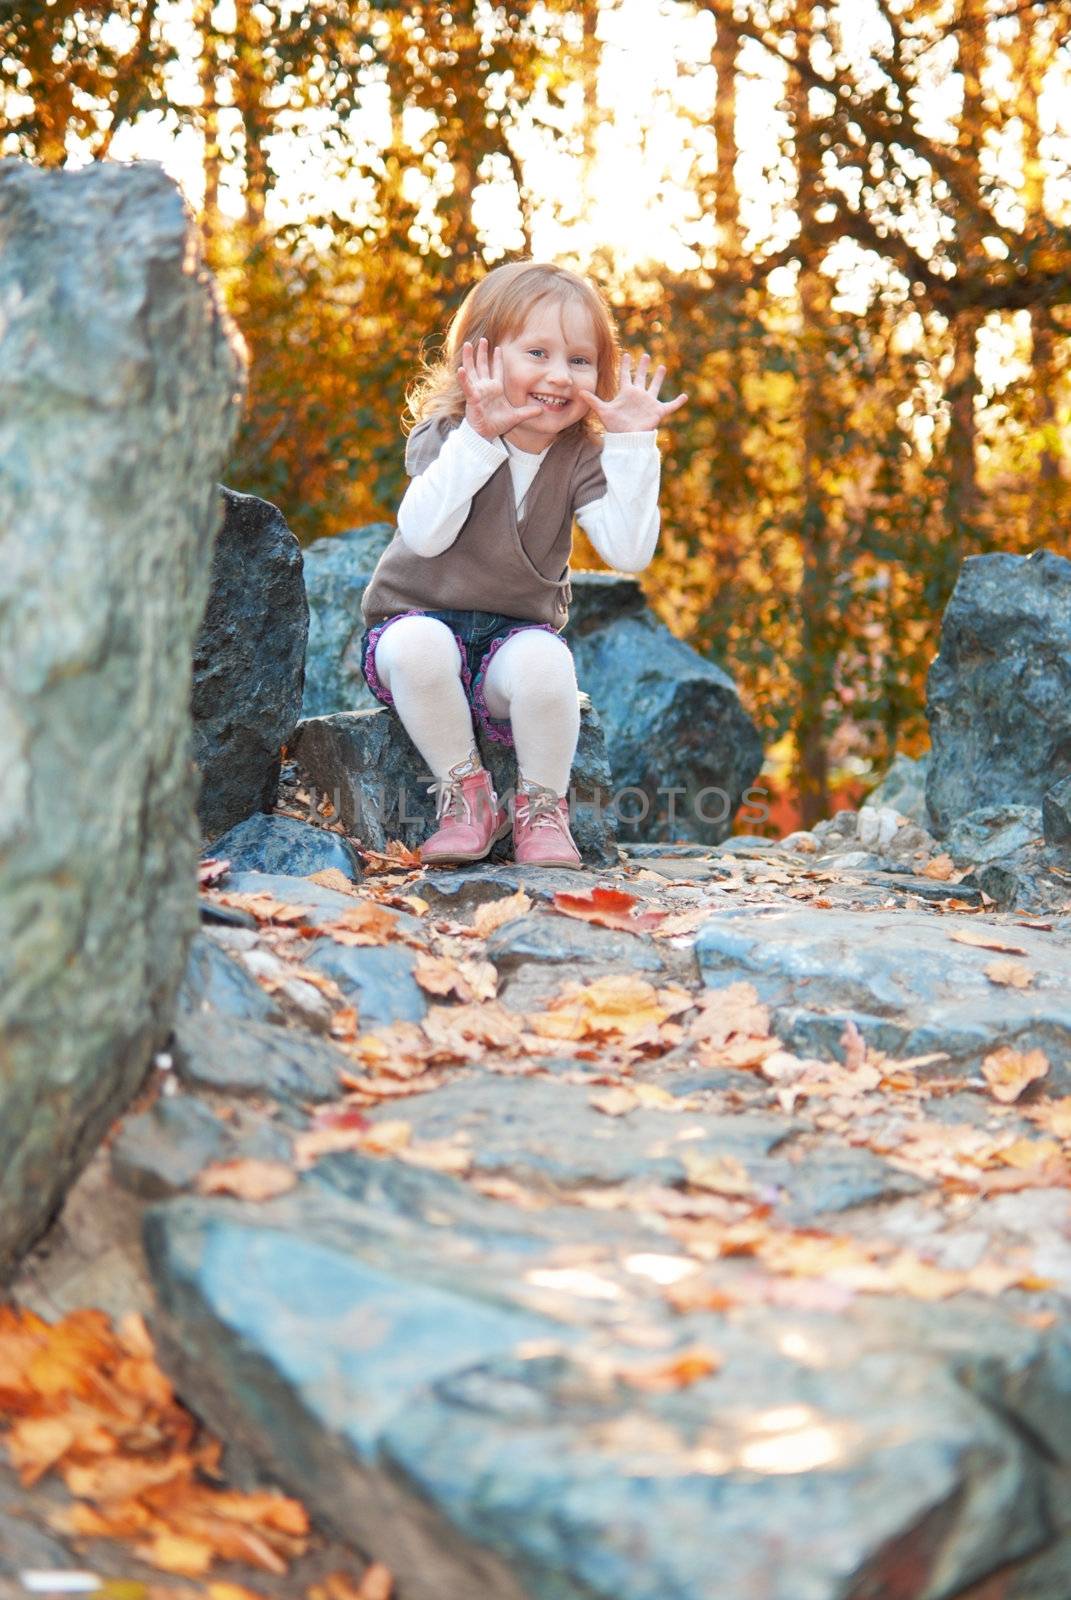 Small girl (3 years old) with smile is sitting on big rock and showing open hands. Photo has space for text